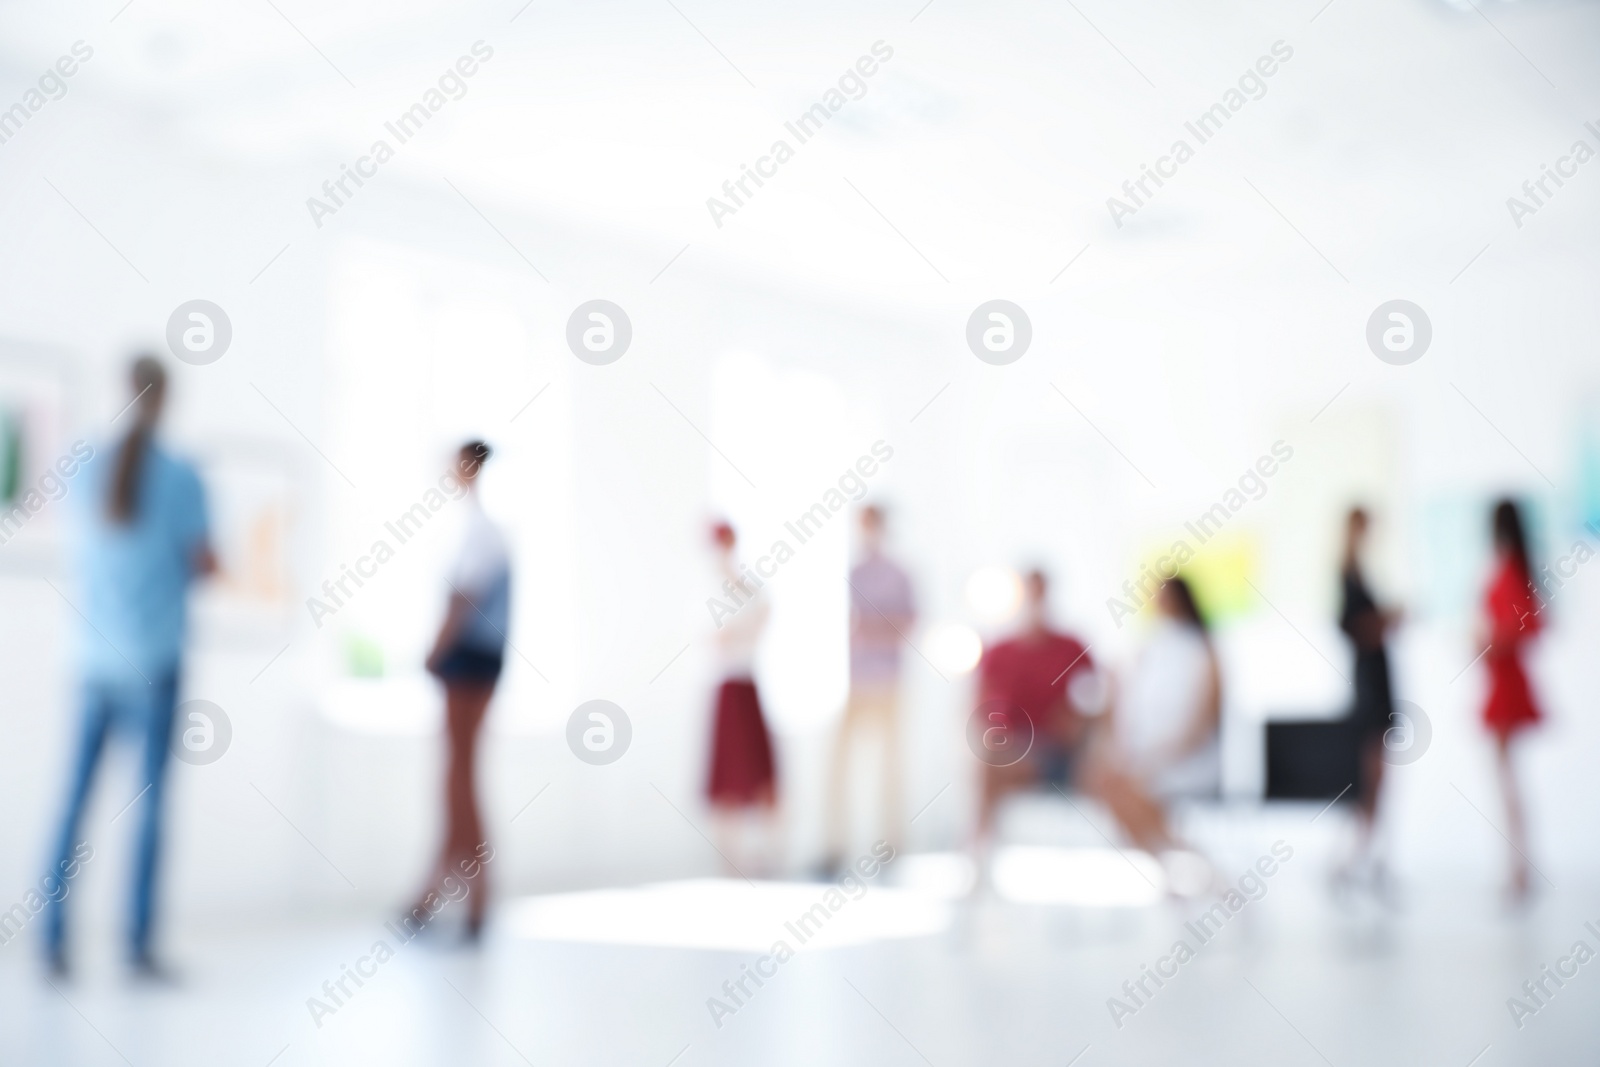 Photo of Blurred view of people at exhibition in art gallery